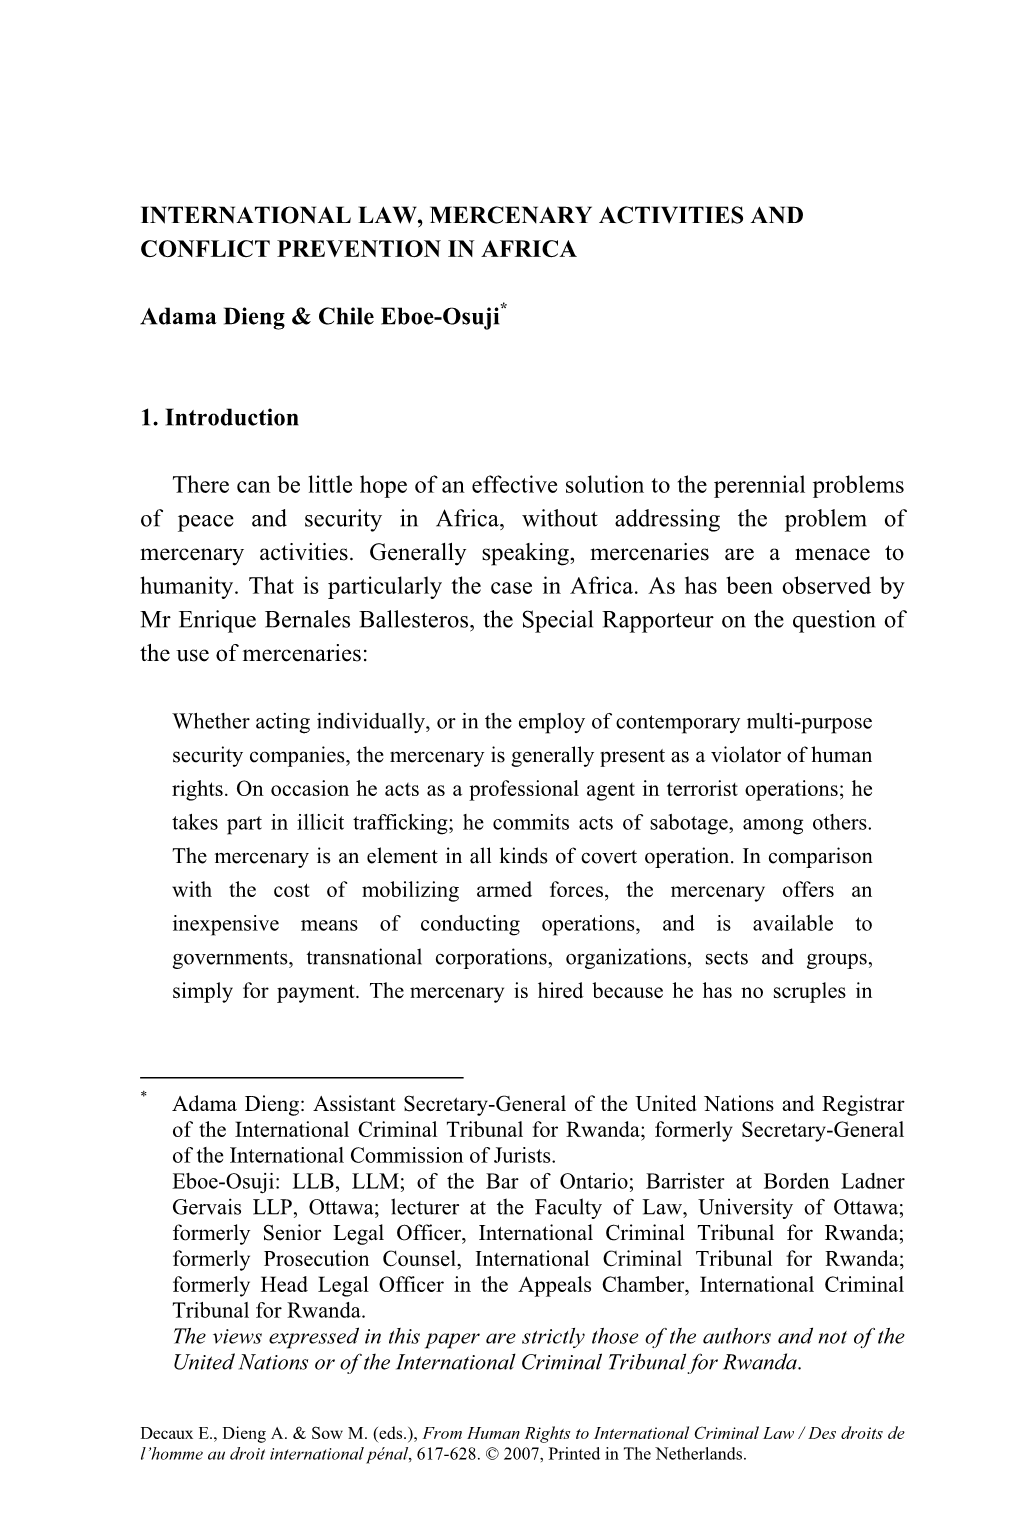 INTERNATIONAL LAW, MERCENARY ACTIVITIES and CONFLICT PREVENTION in AFRICA Adama Dieng & Chile Eboe-Osuji* 1. Introduction Th